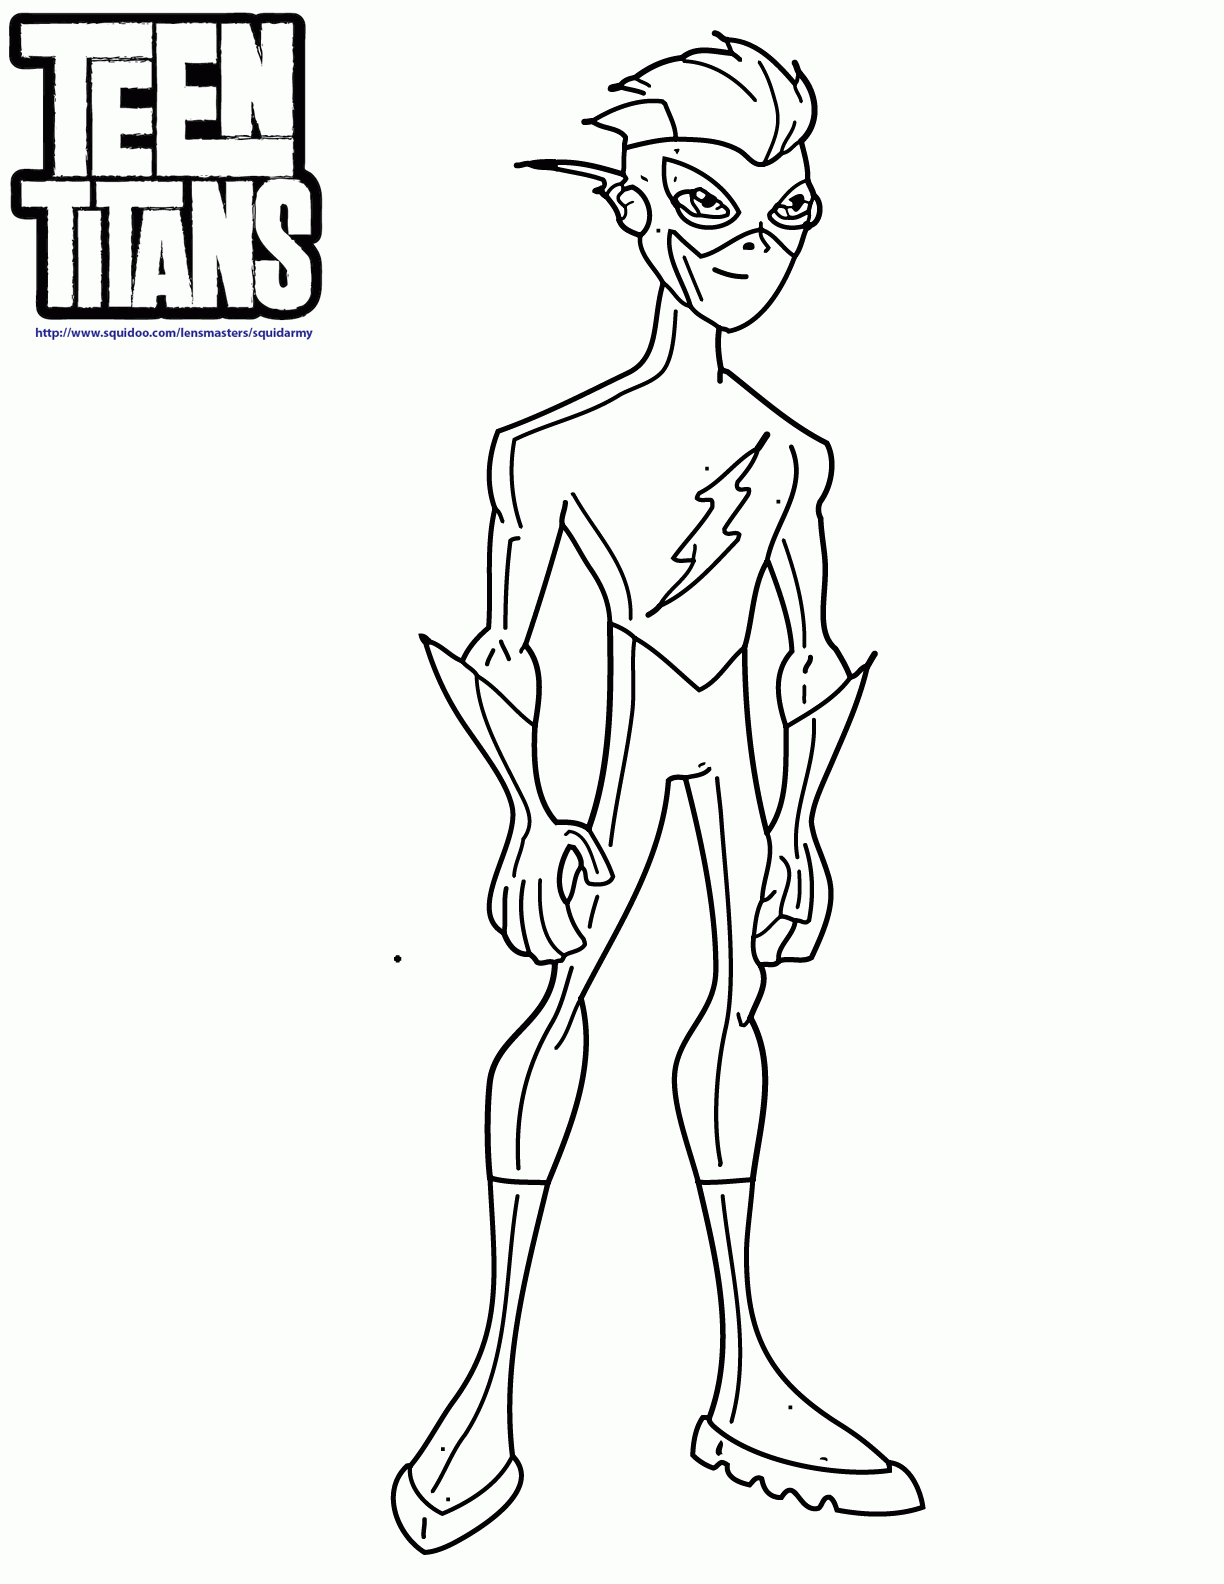 10 Pics of Teen Titans Chibi Coloring Pages - Cute Teen Titans ...